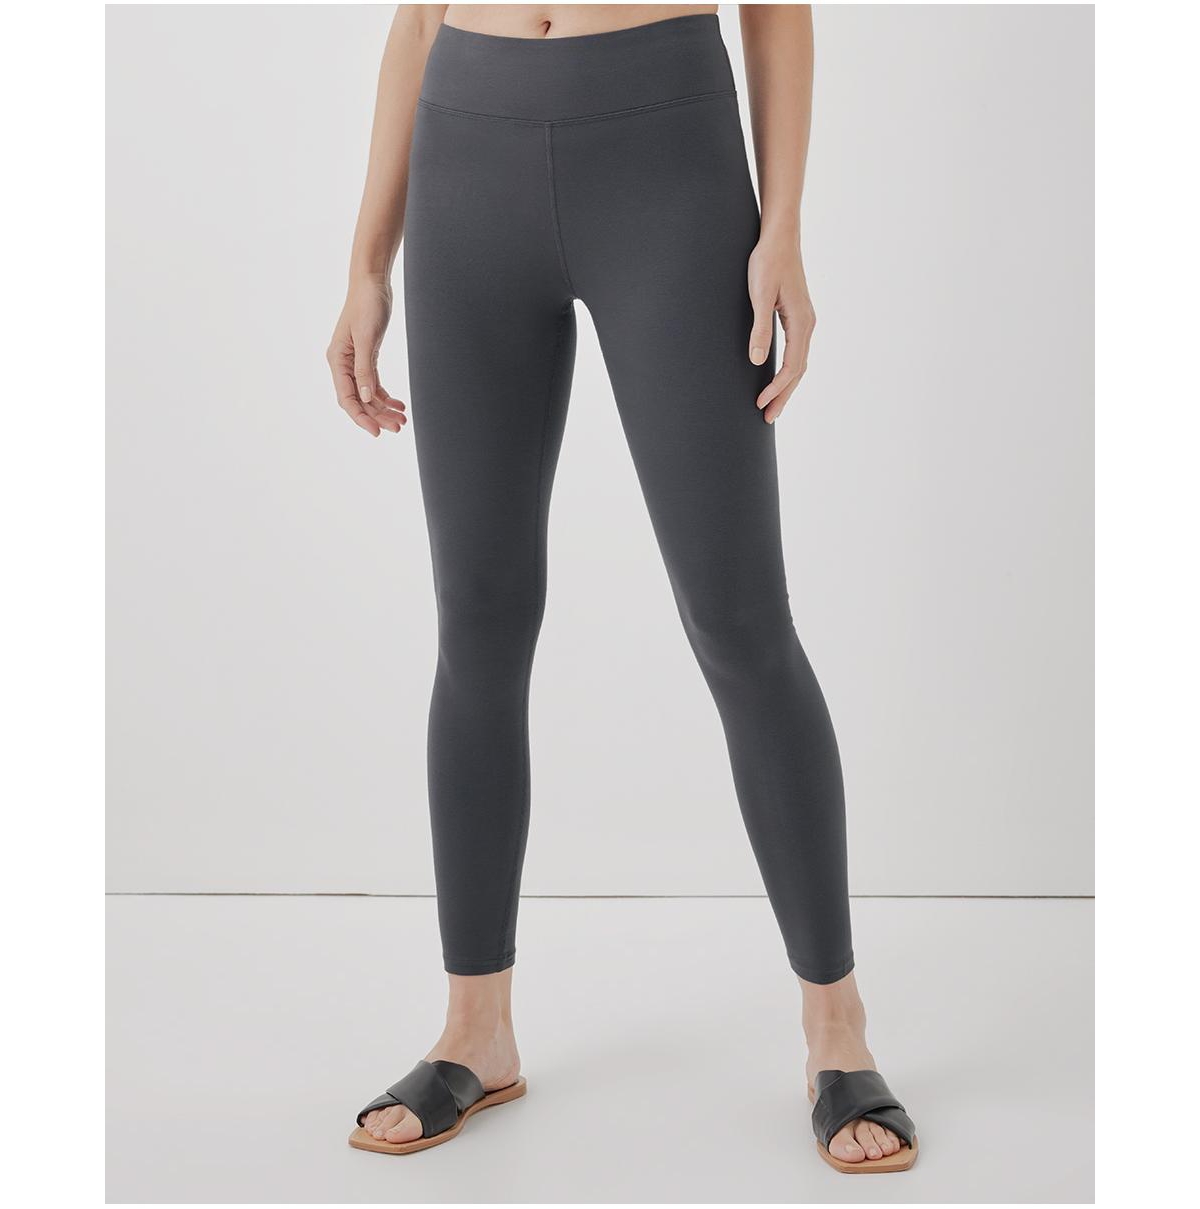 Women's PureFit Legging Made With Organic Cotton - French navy